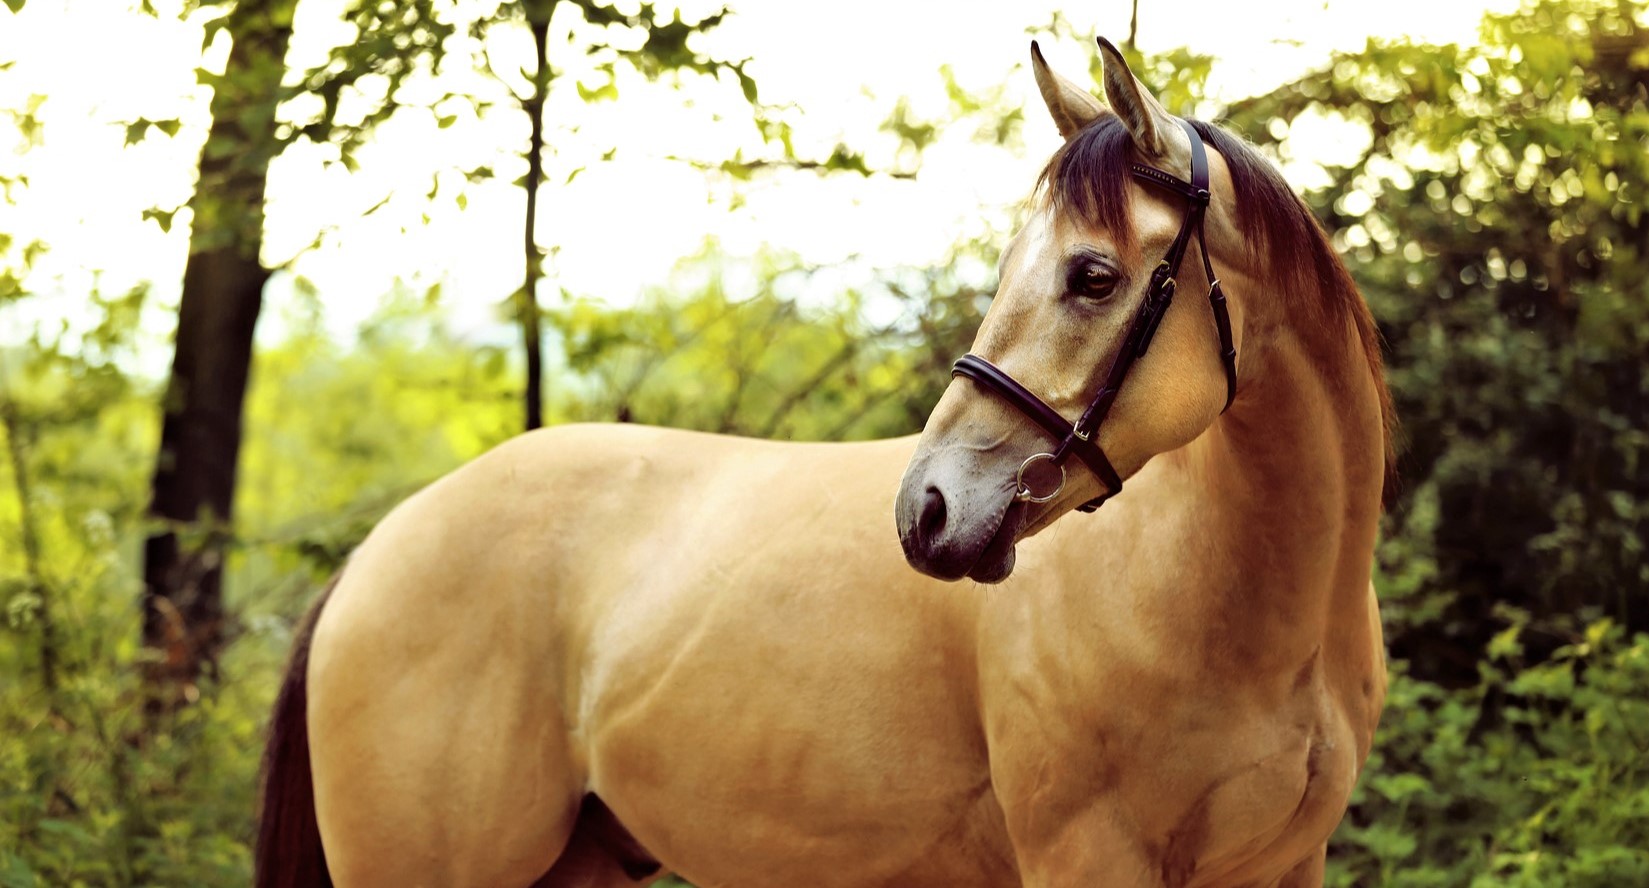 American Quarter Horse breed facts and history